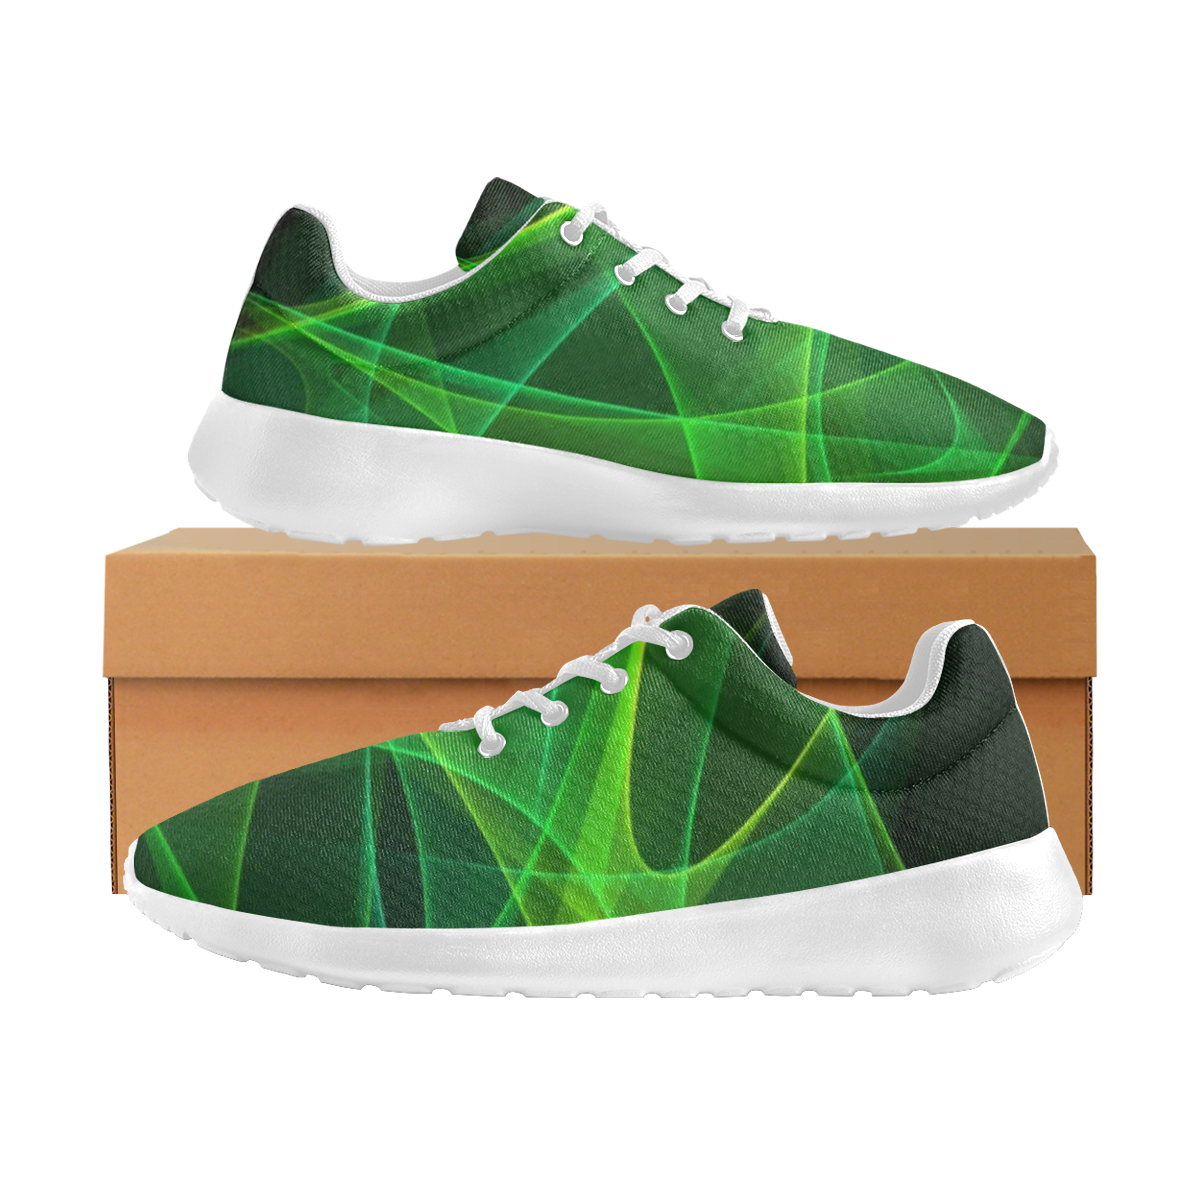 green-3318343 Women's Athletic Shoes (Model 0200)